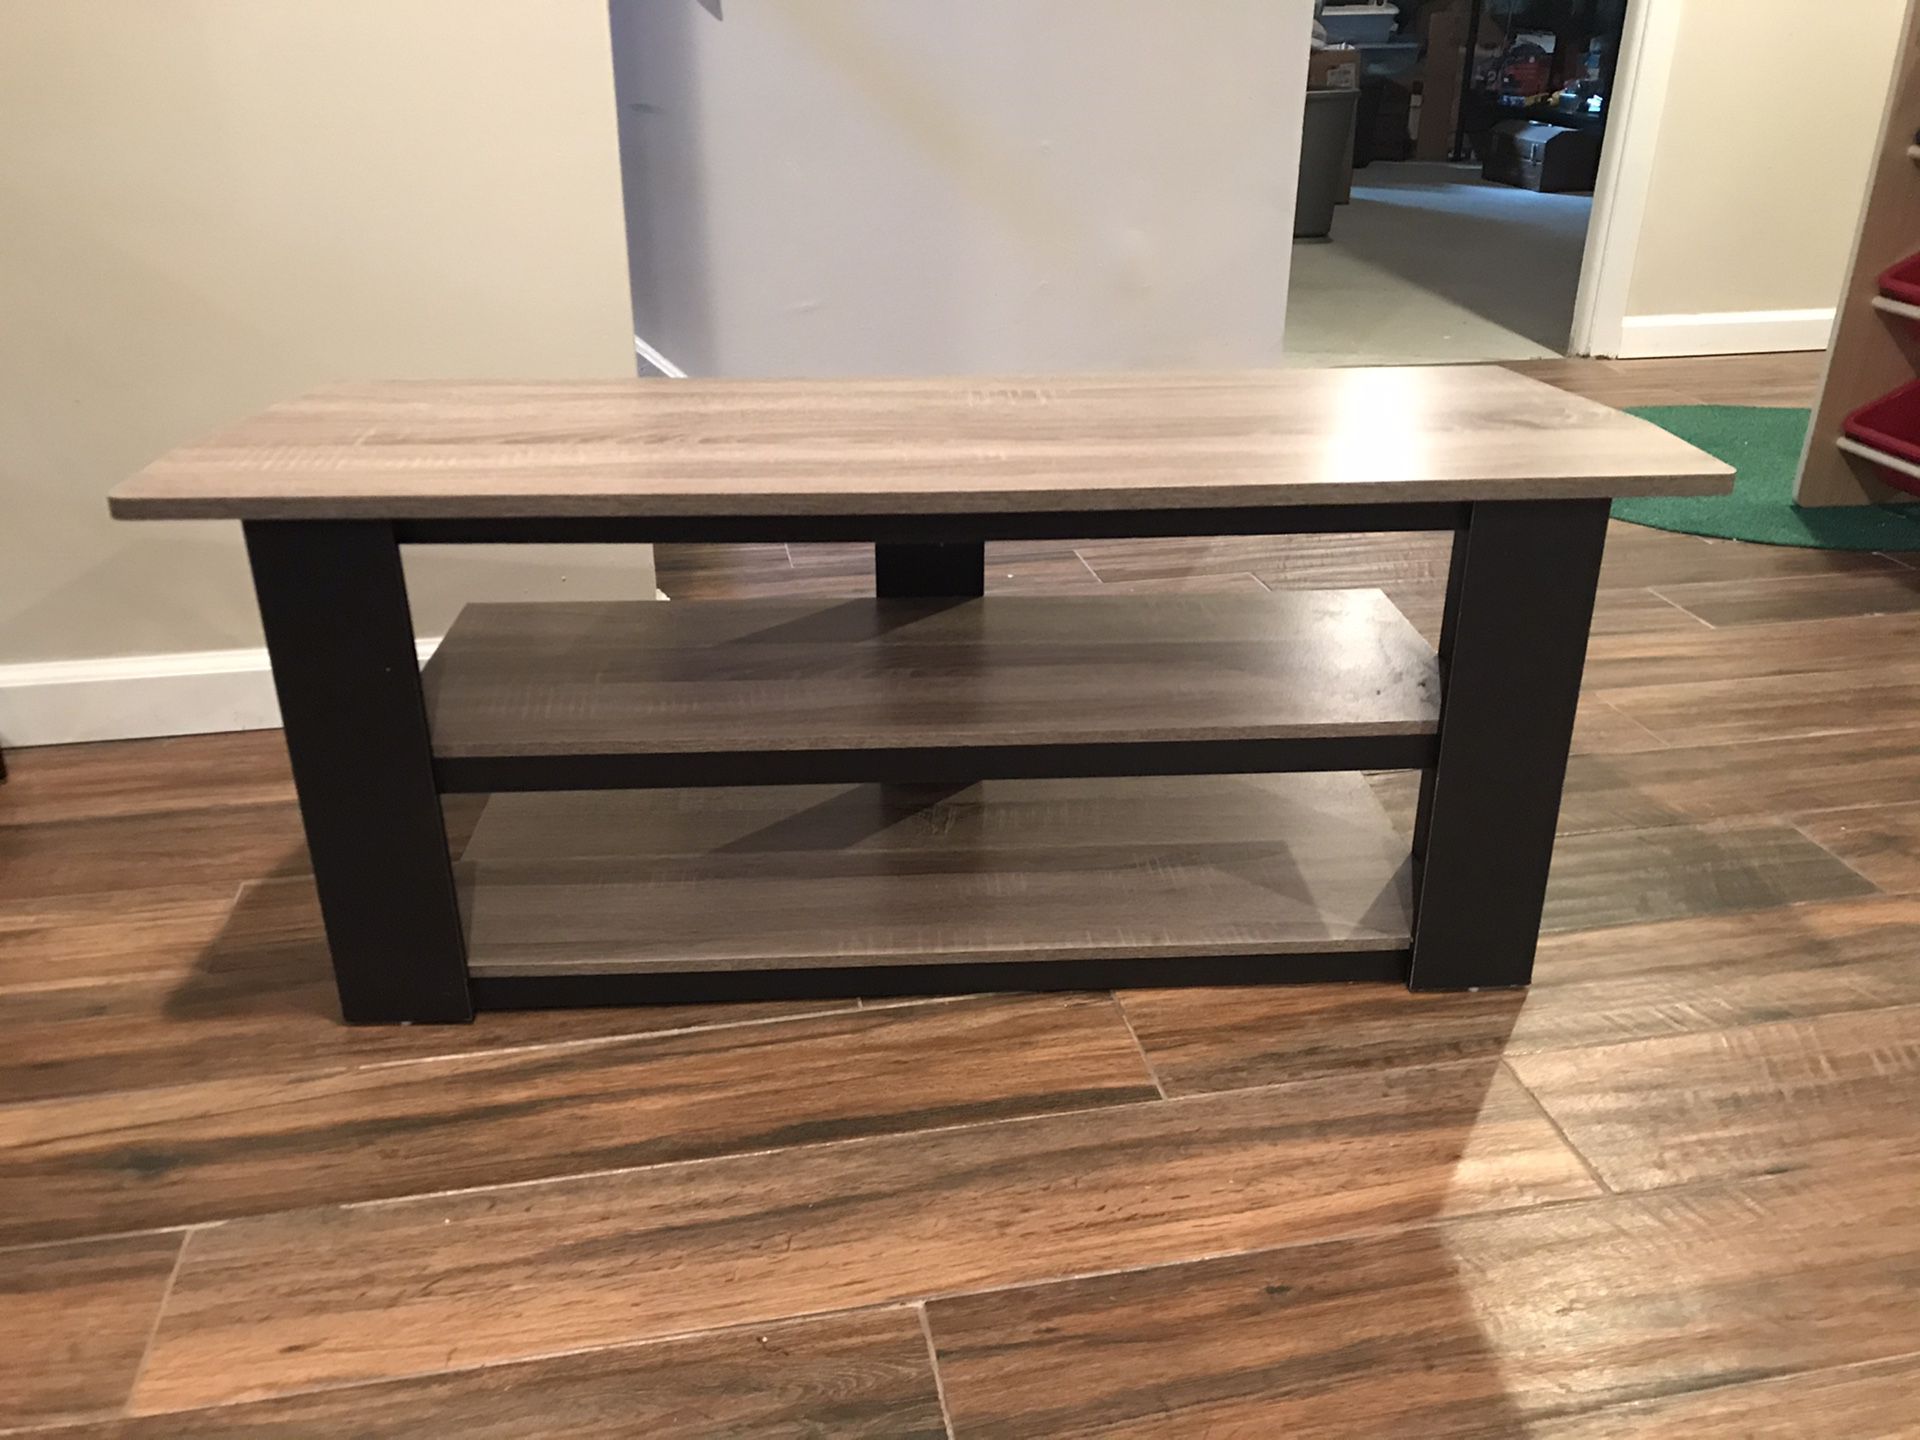 42’ inch Tv stand